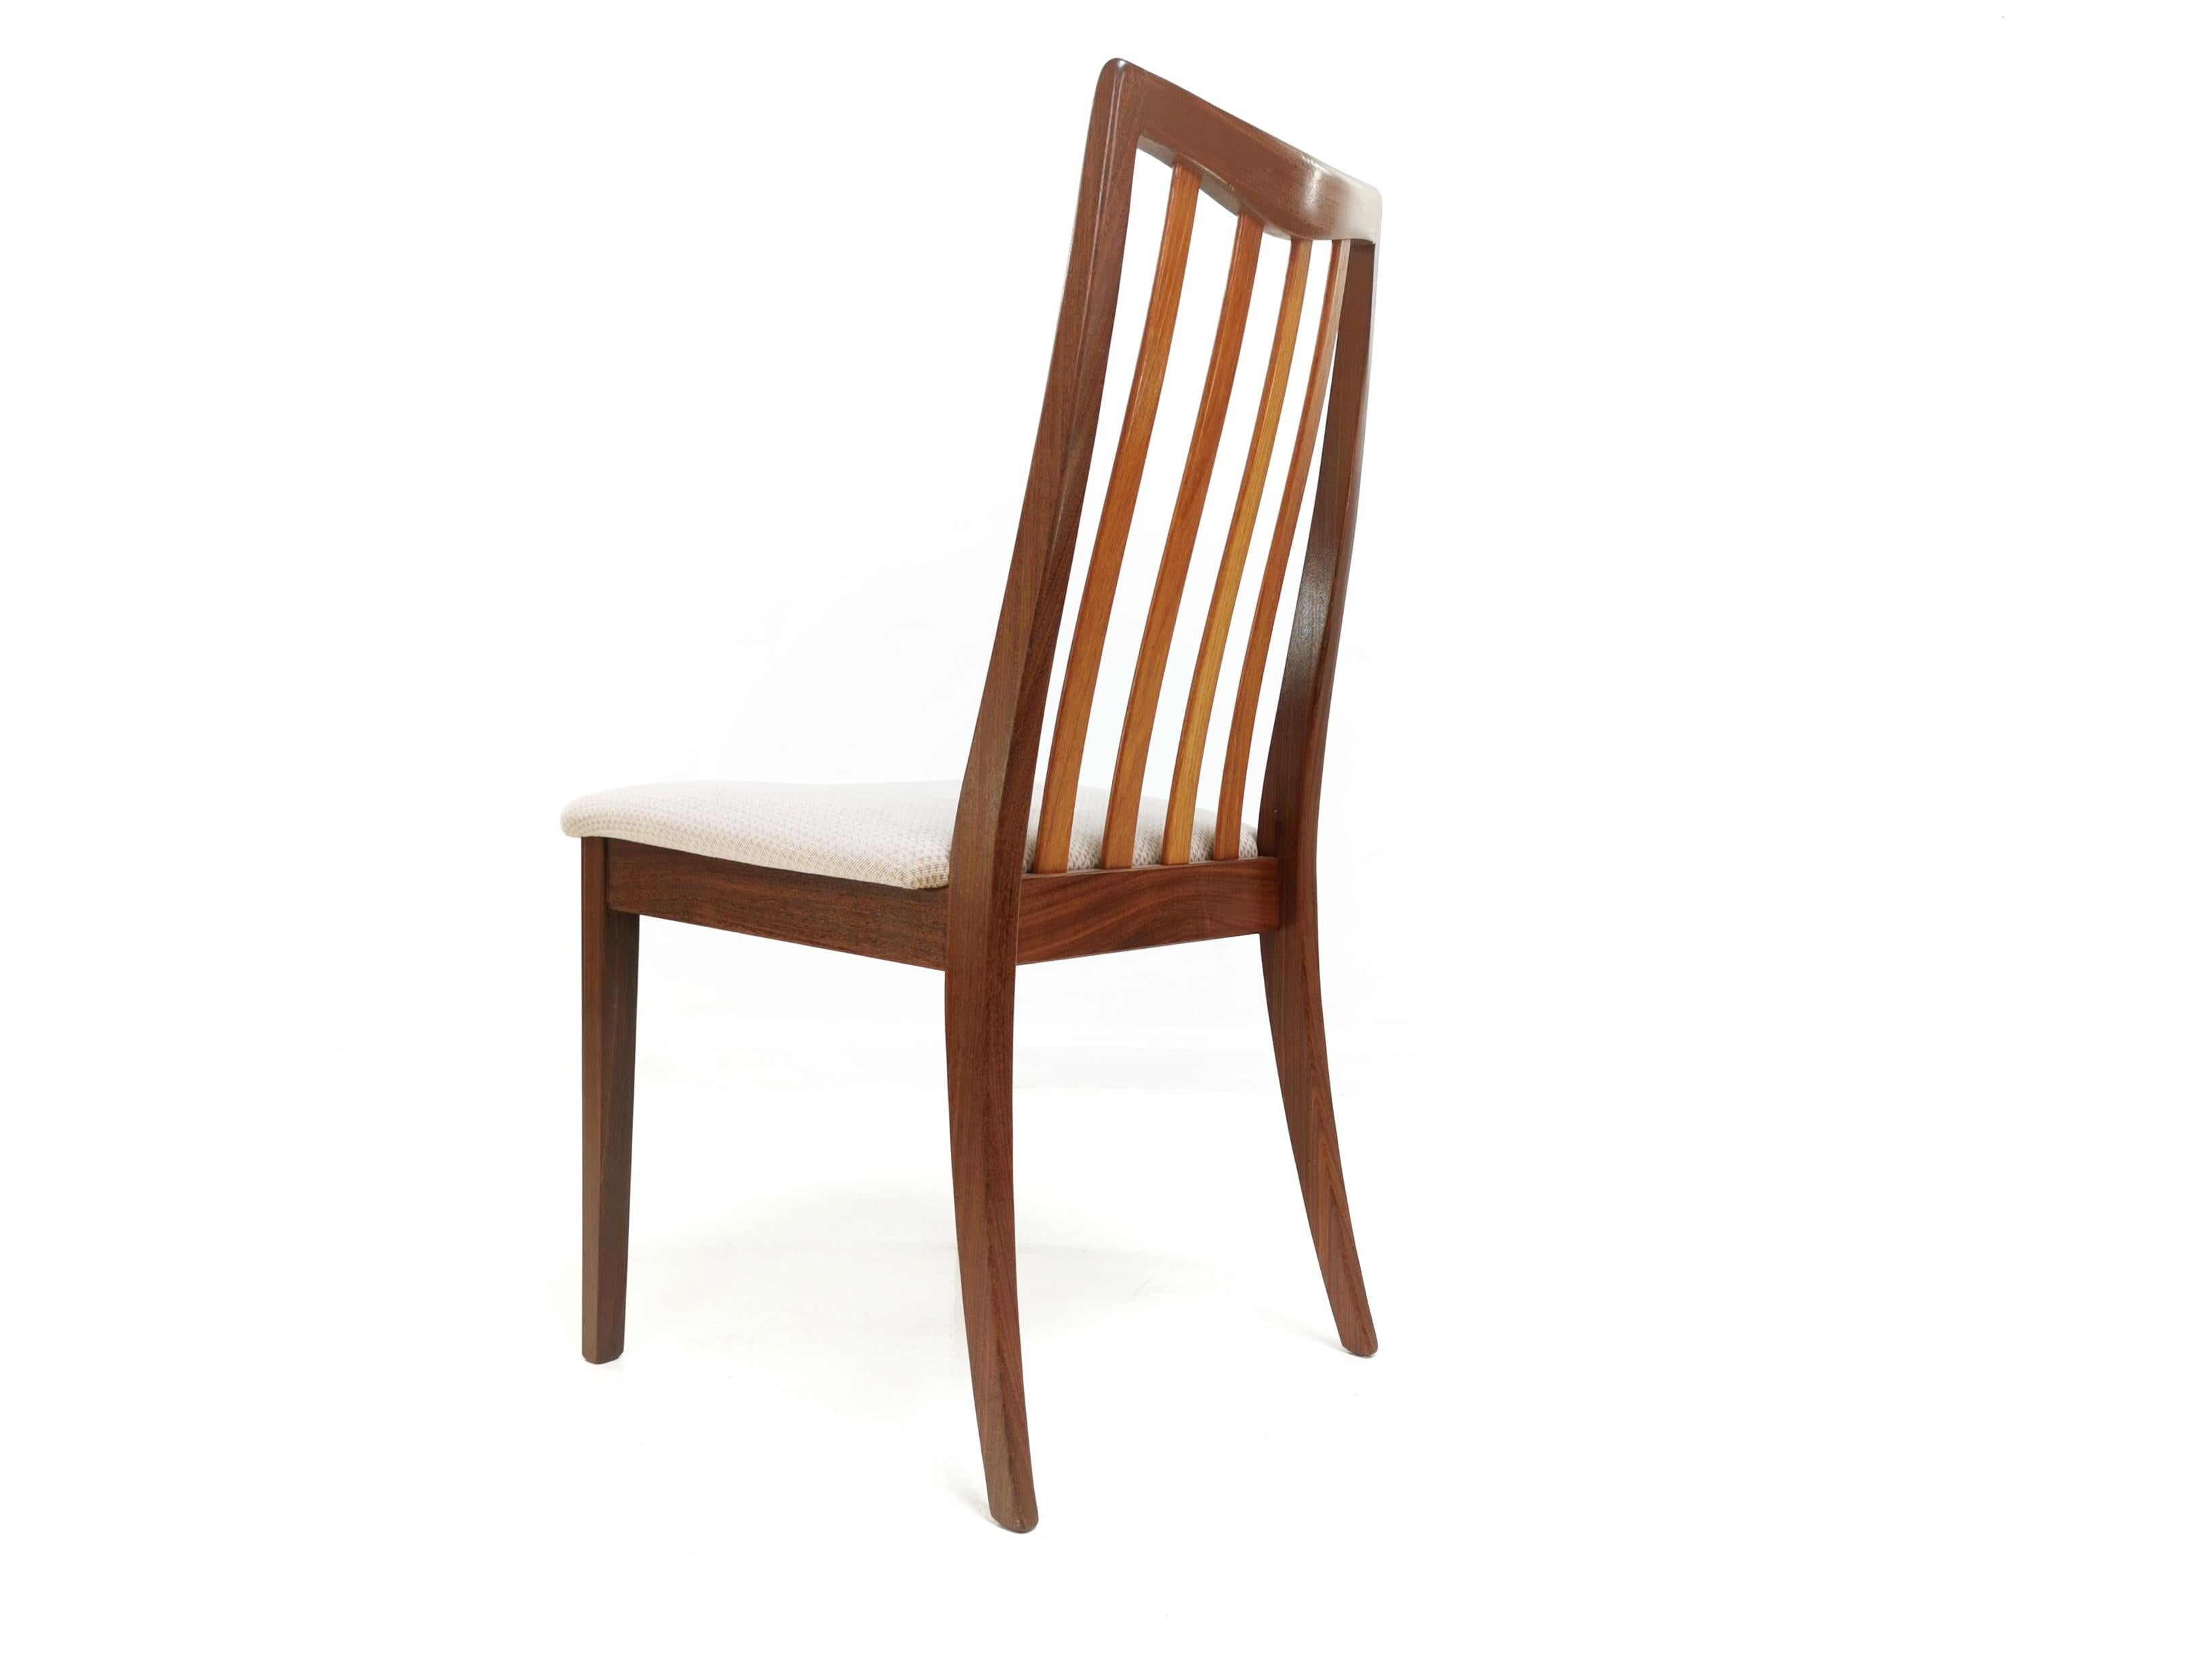 Mid-Century Modern Vintage Teak Dining Chairs by Leslie Dandy for G-Plan, 1960s, Set of 4